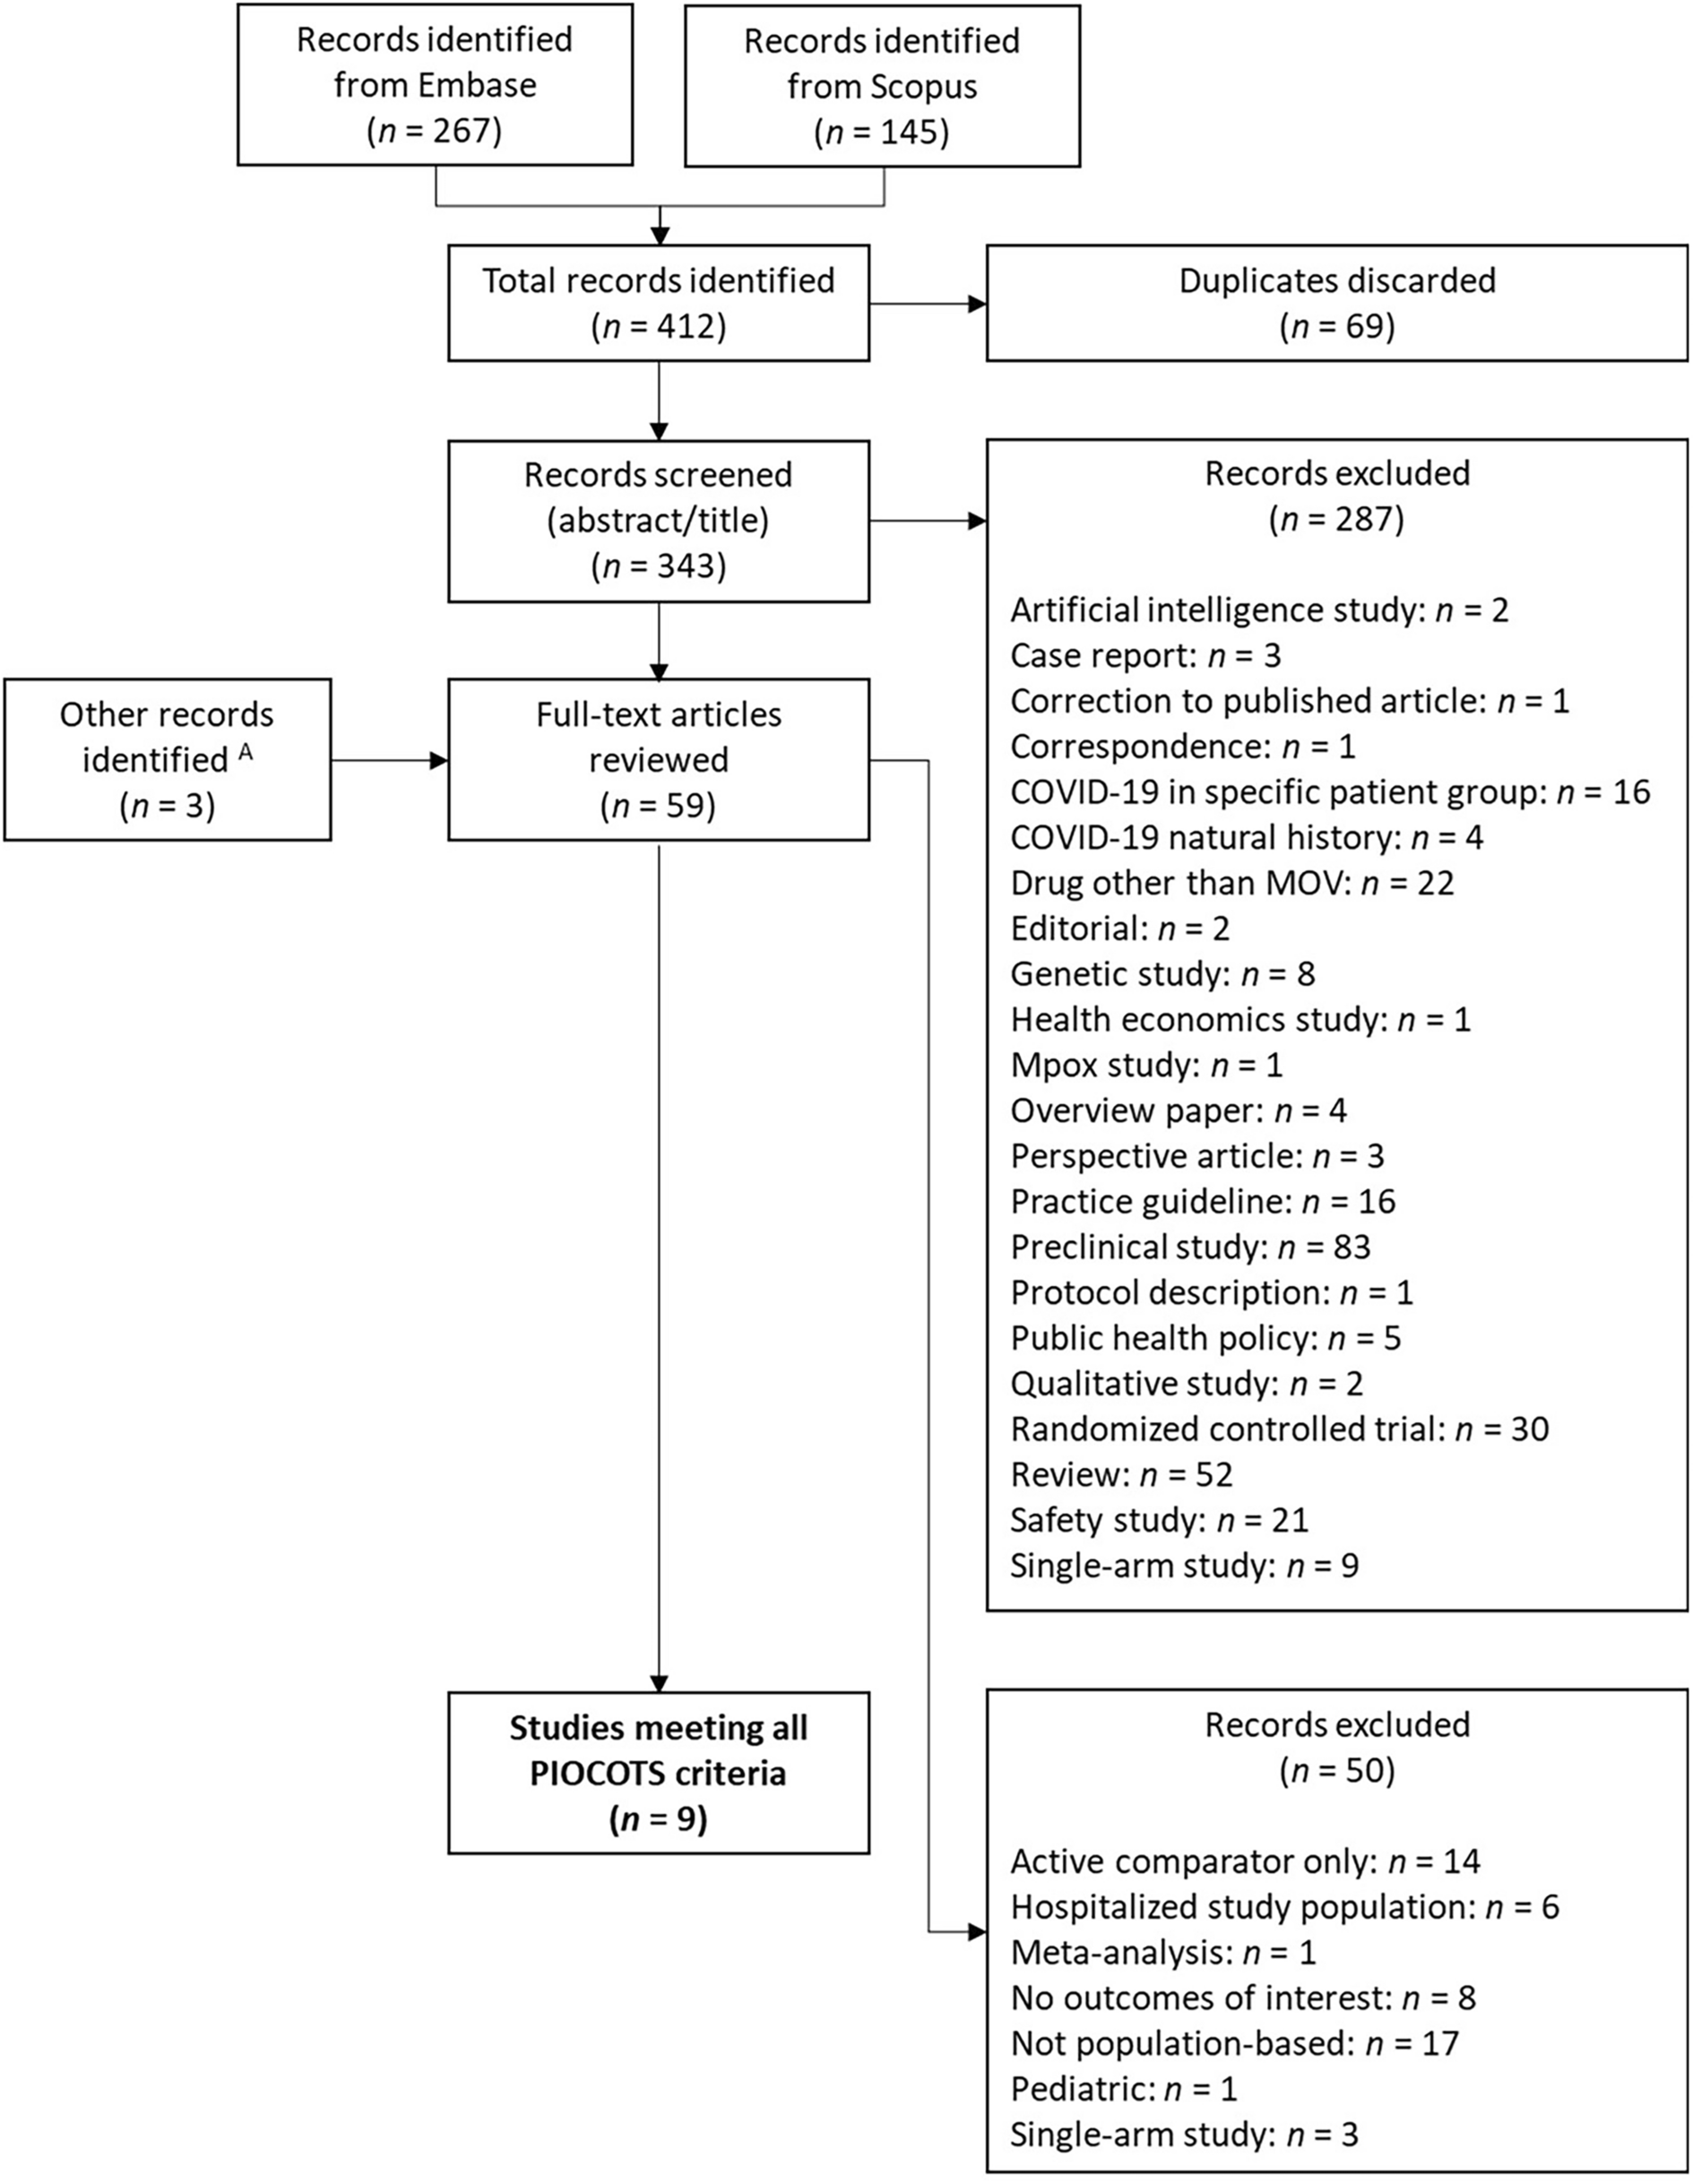 Molnupiravir Use Among Patients with COVID-19 in Real-World Settings: A Systematic Literature Review